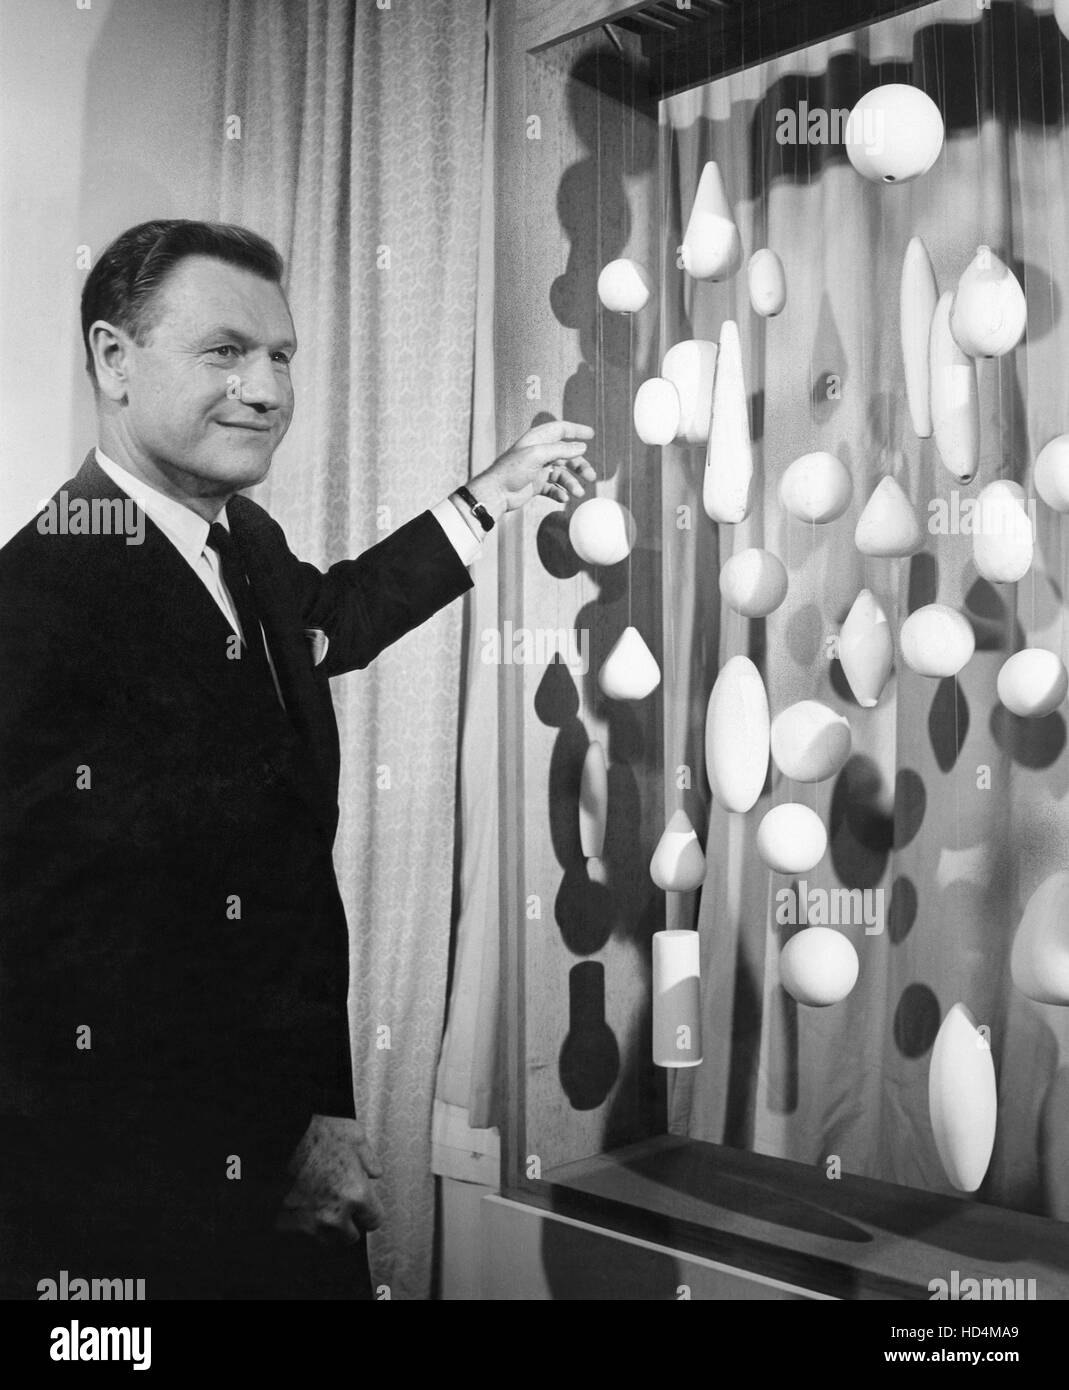 THE ART OF COLLECTING, New York Governor Nelson Rockefeller, January 19, 1964 Stock Photo